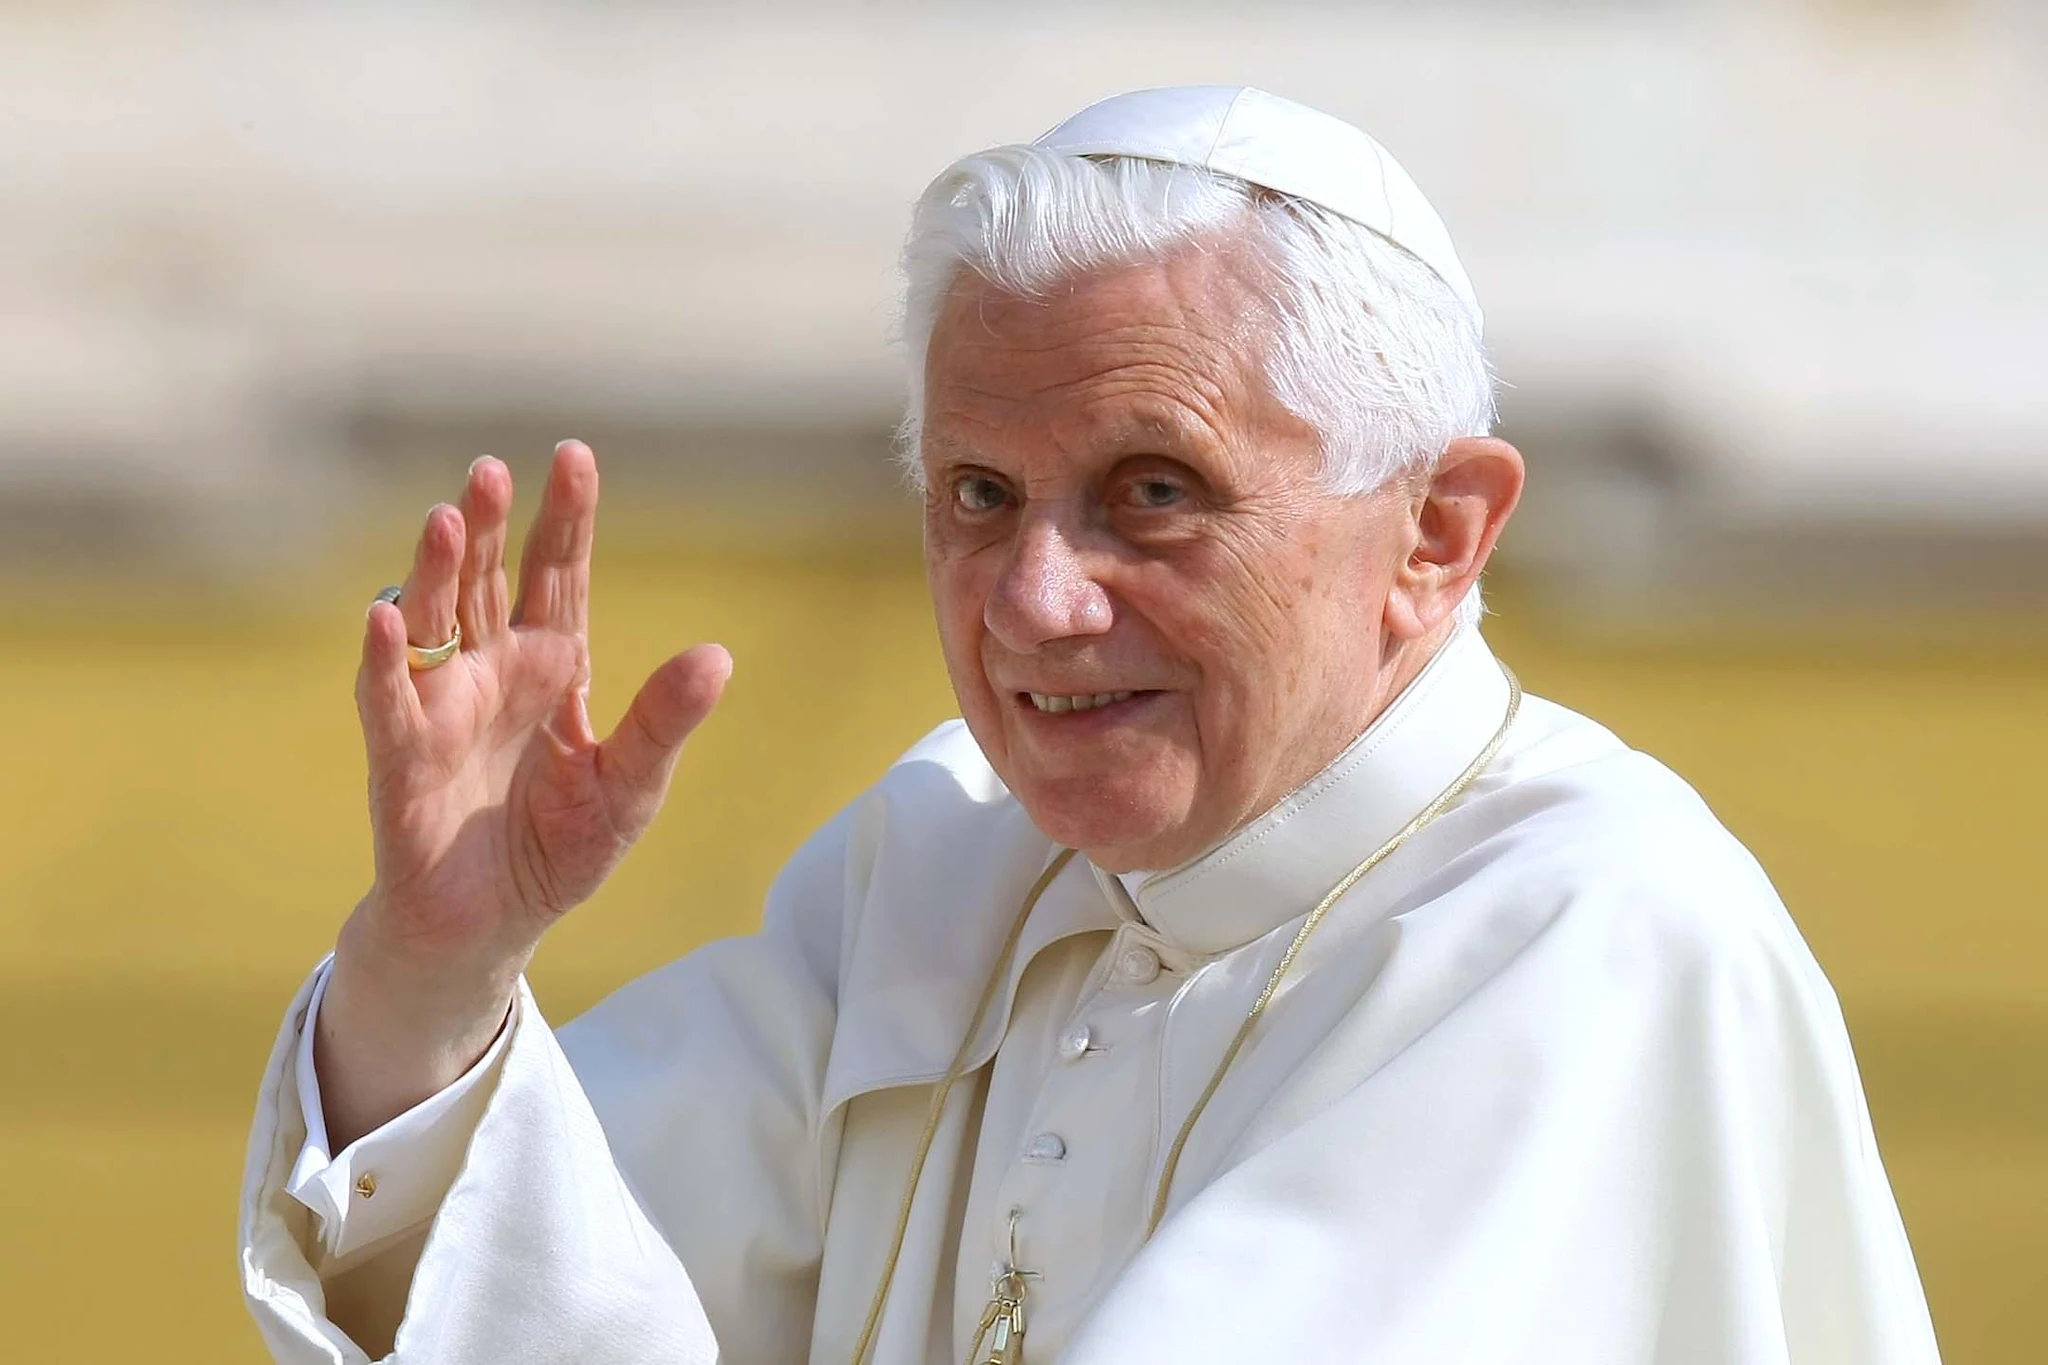 The German press Benedict XVI more fragile and sick after